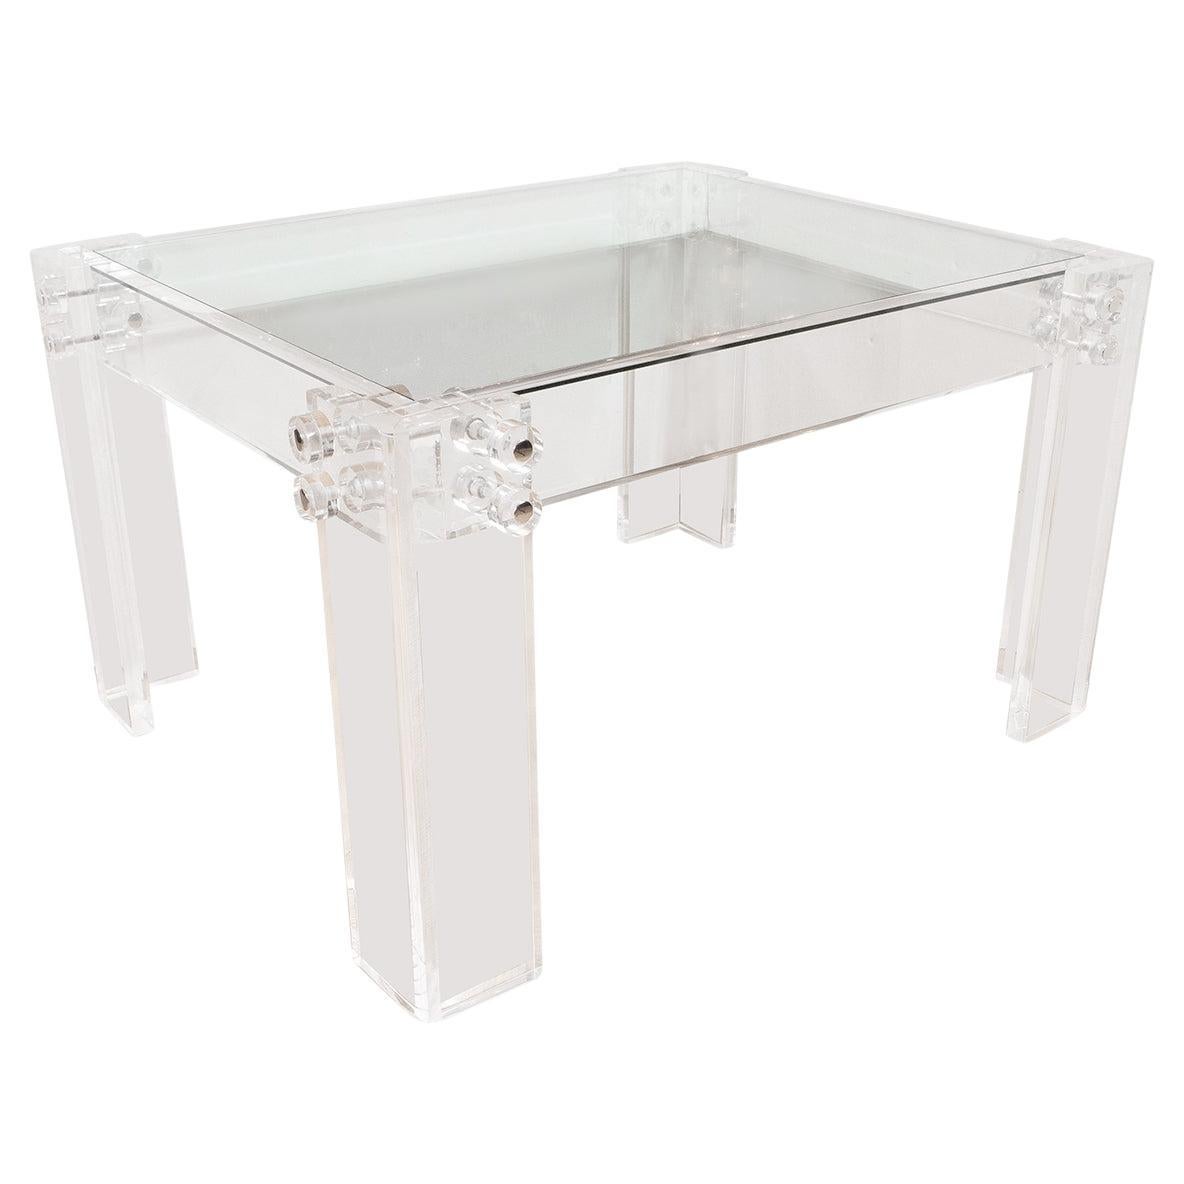 Pair of Lucite and Glass End Tables For Sale